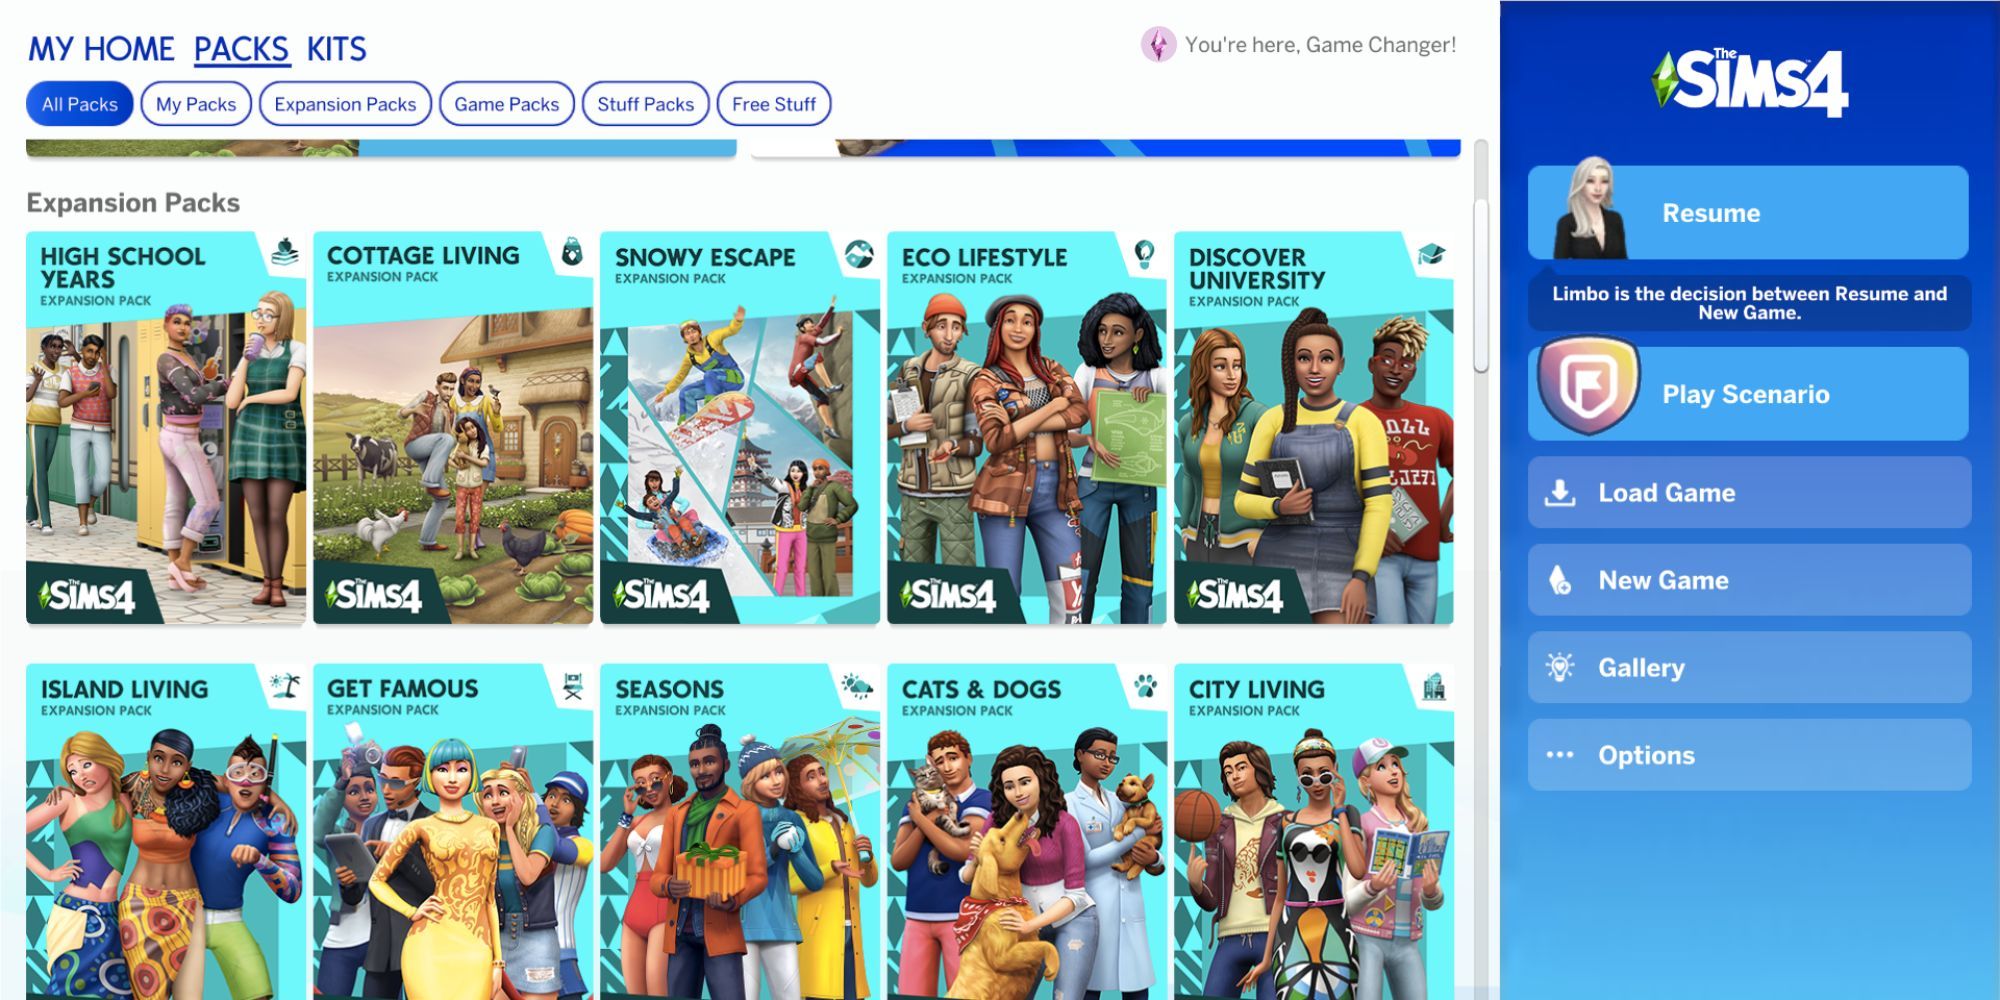 Sims 4 2023 Roadmap and Details - The Sims 4 Guide - IGN